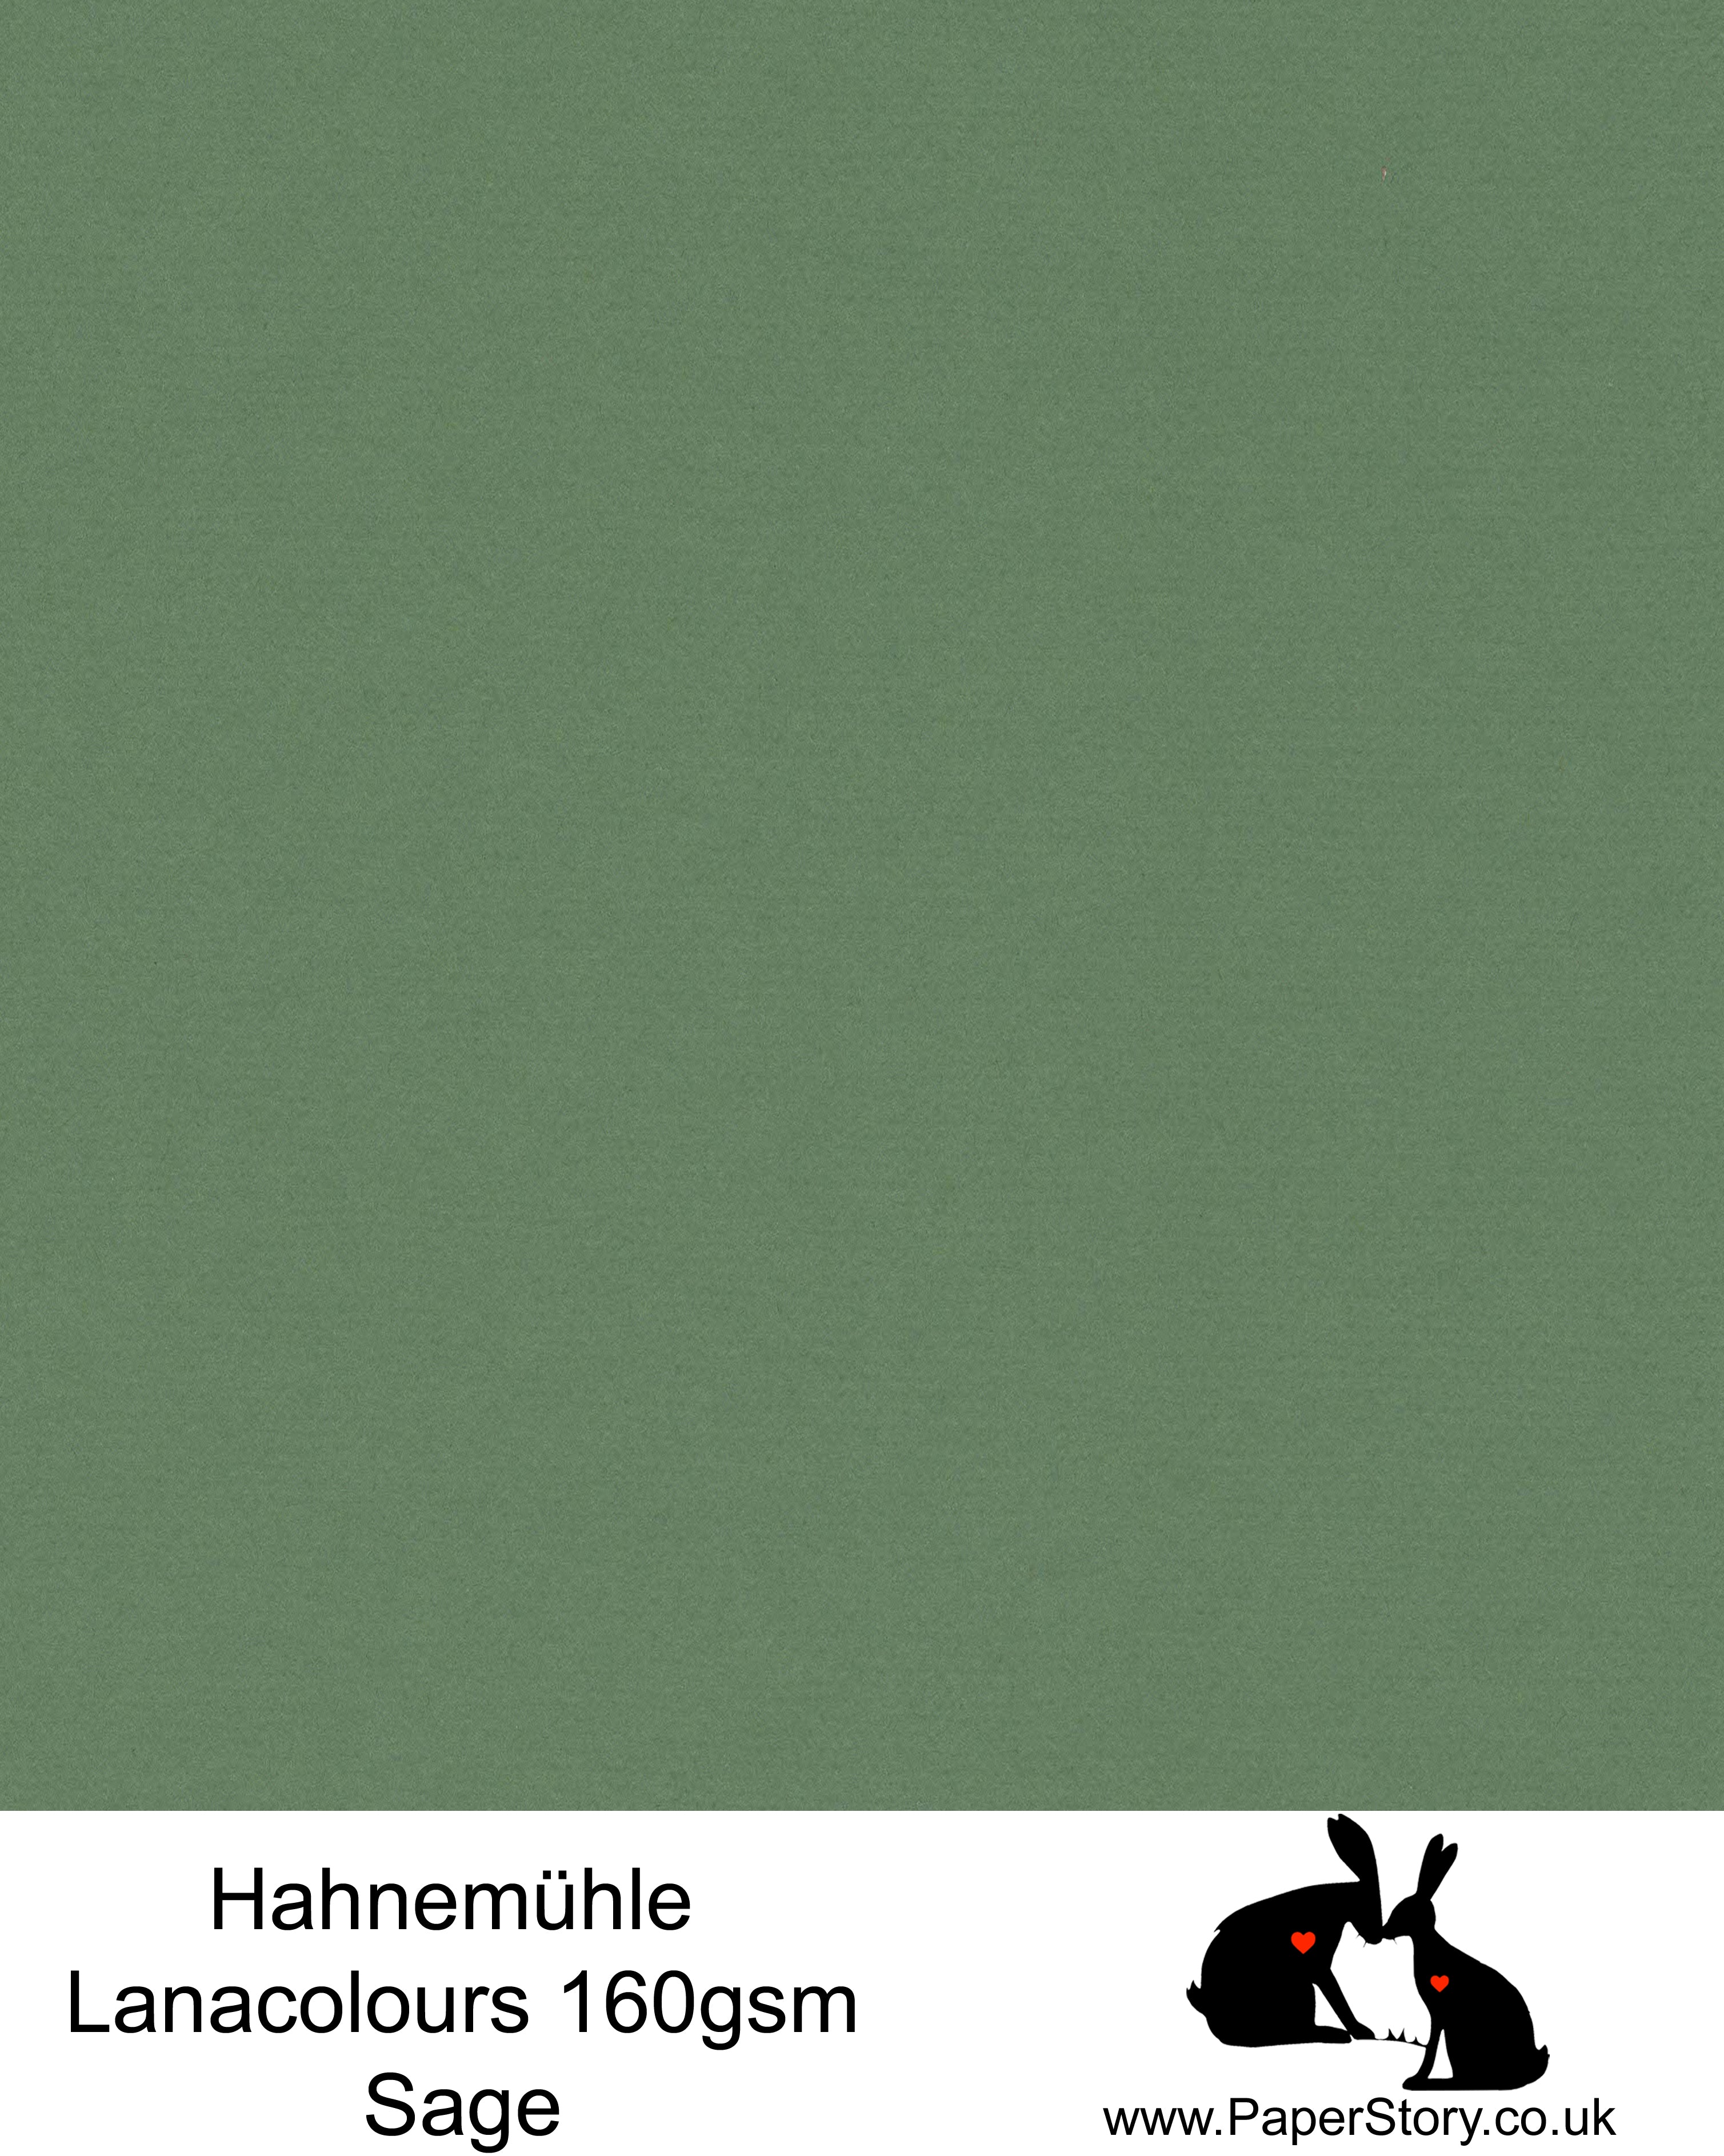 Hahnemühle Lana Colours pastel sage green hammered paper 160 gsm. Artist Premium Pastel and Papercutting Papers 160 gsm often described as hammered paper